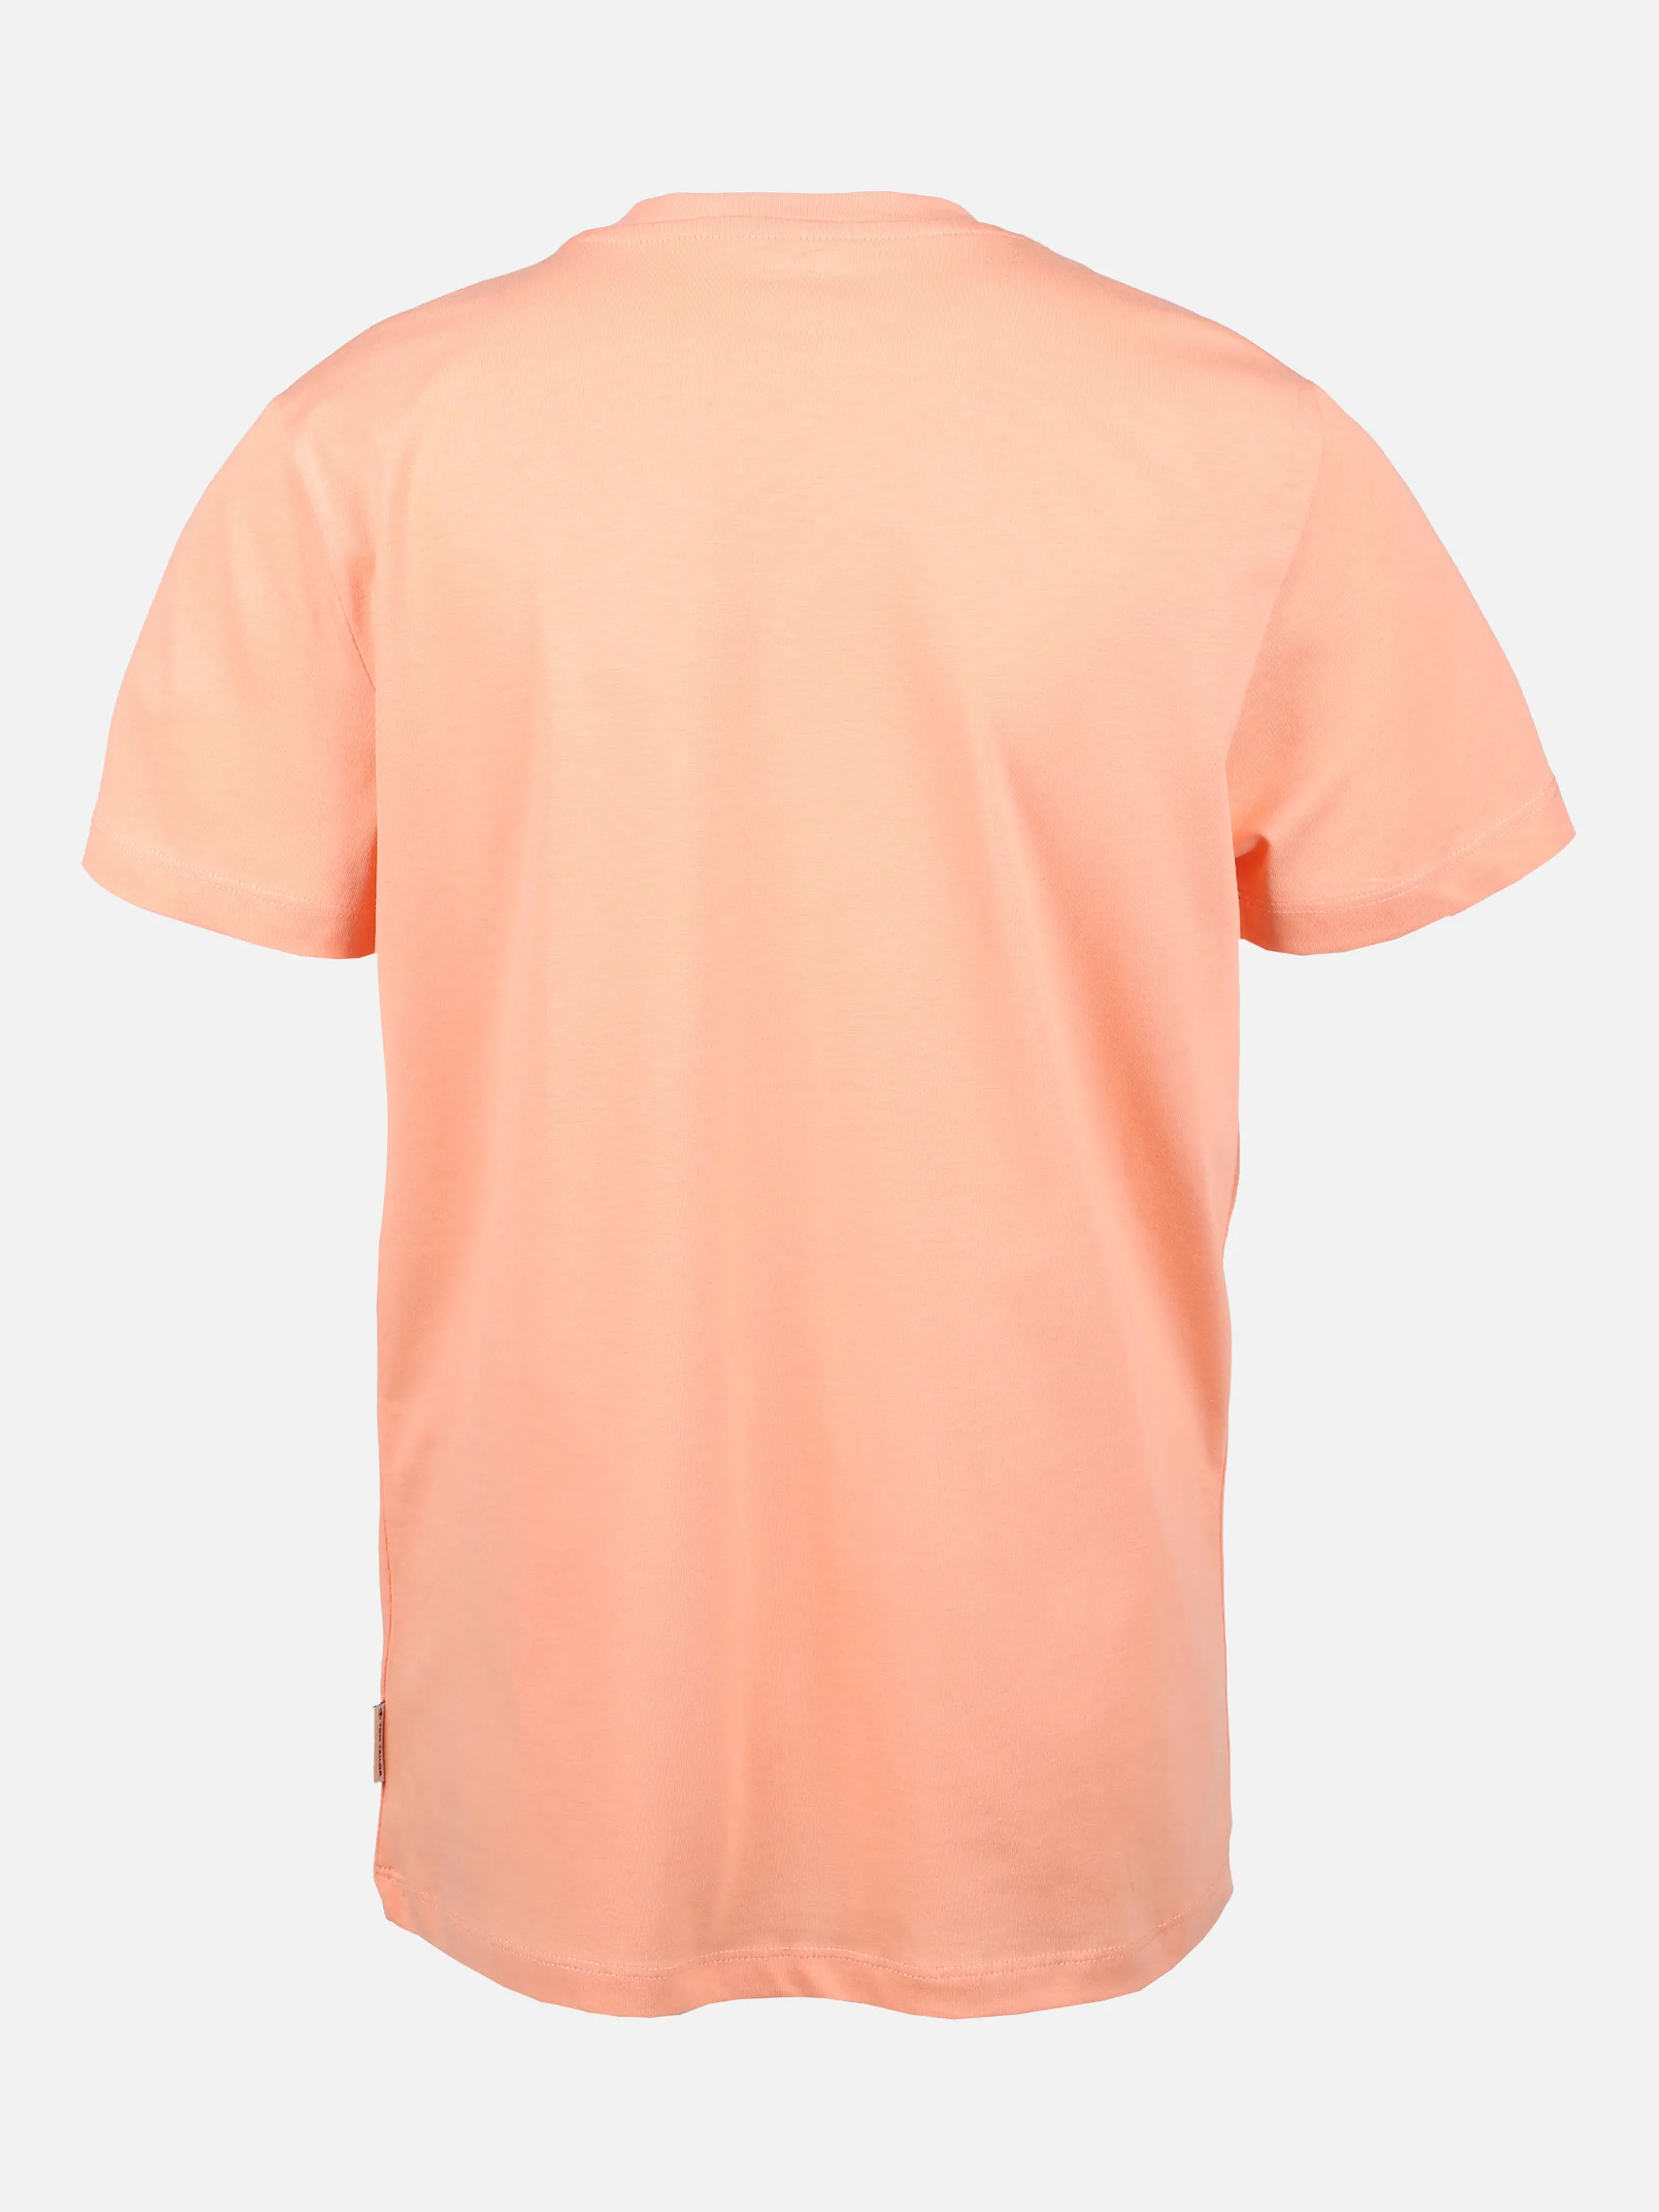 Tom Tailor 1031676 fitted printed t-shirt Orange 865834 23680 2